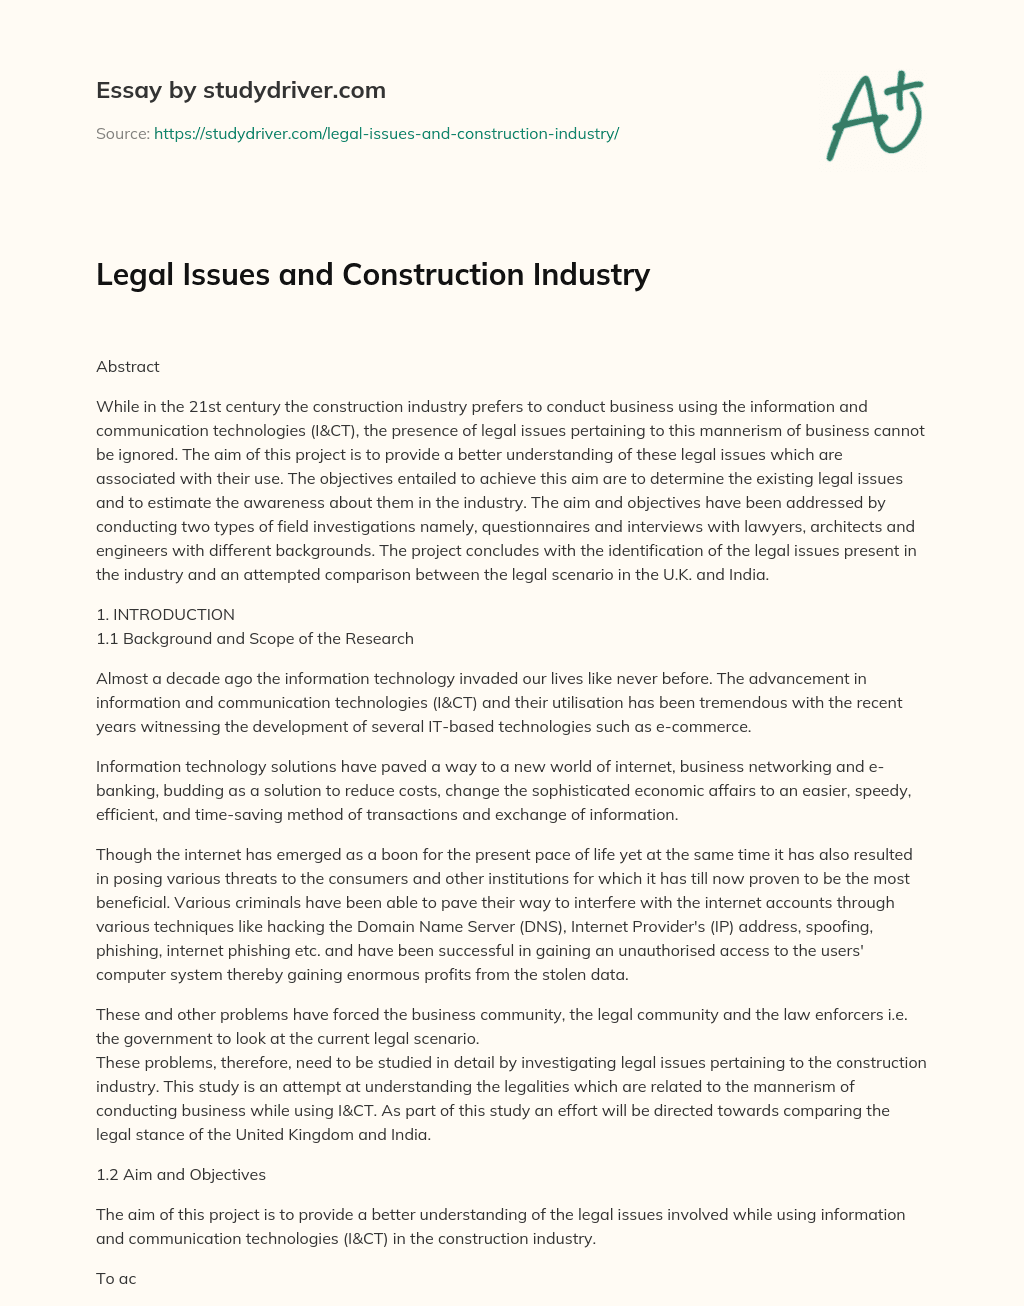 Legal Issues and Construction Industry essay